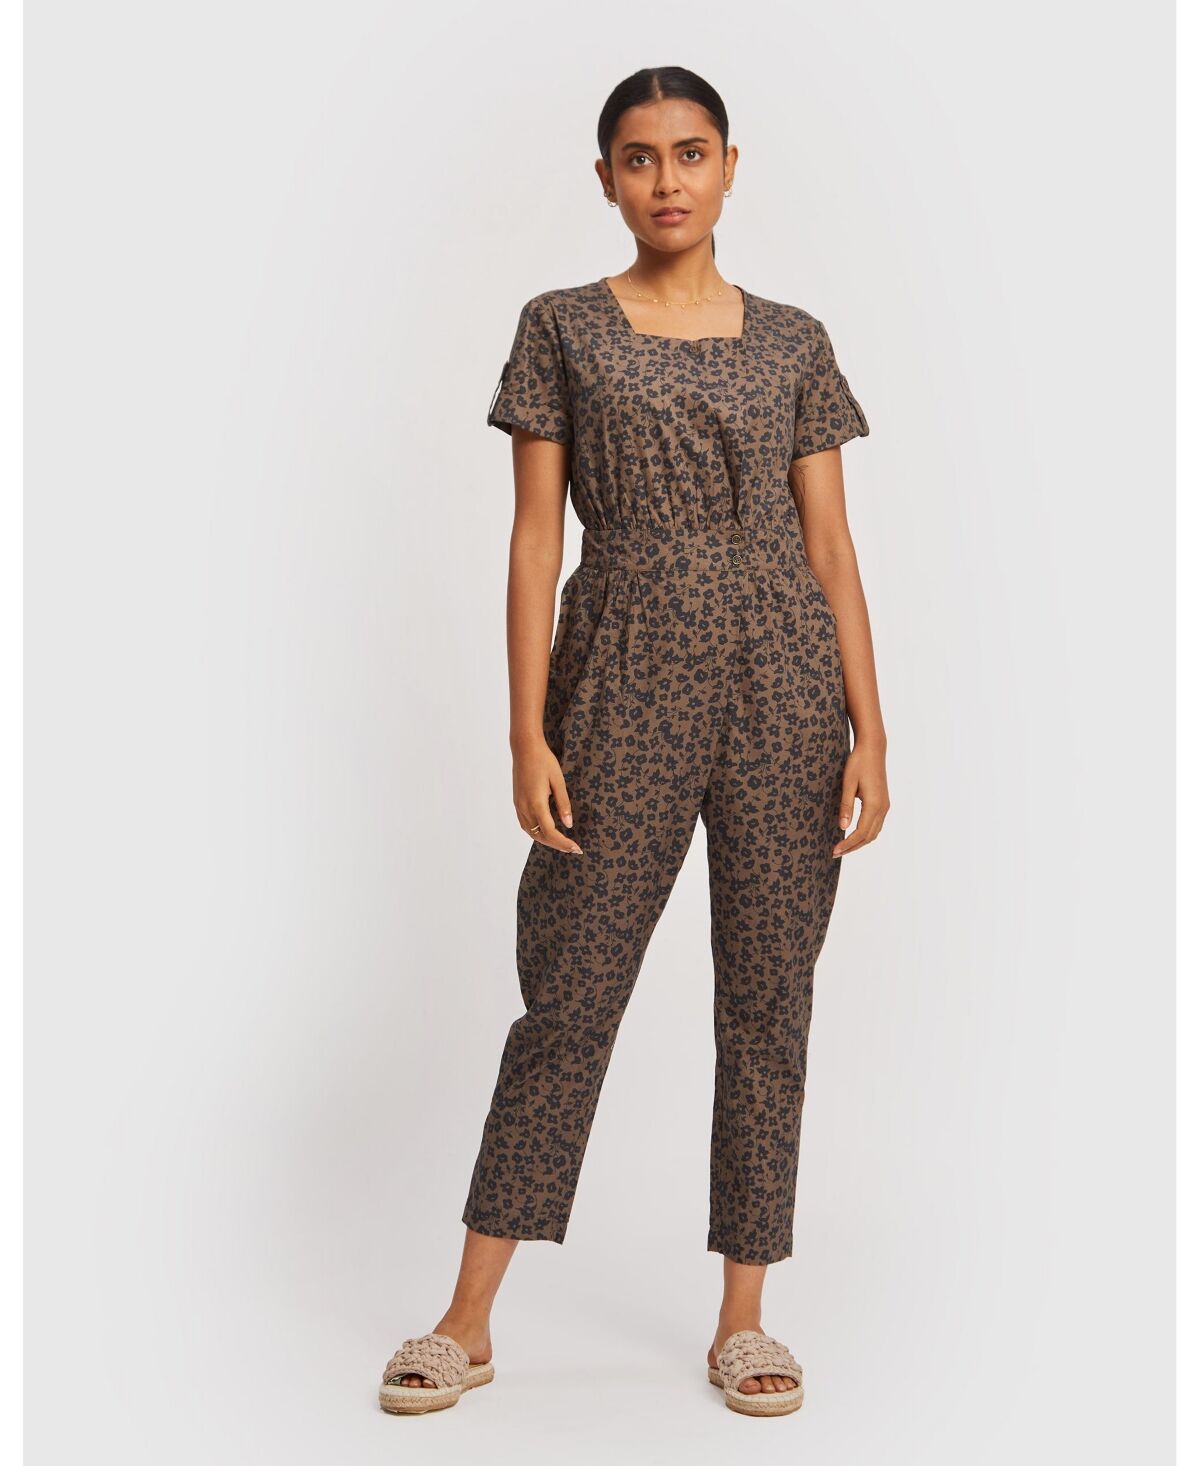 Reistor Womens Spotted Overlap Jumpsuit - Brown